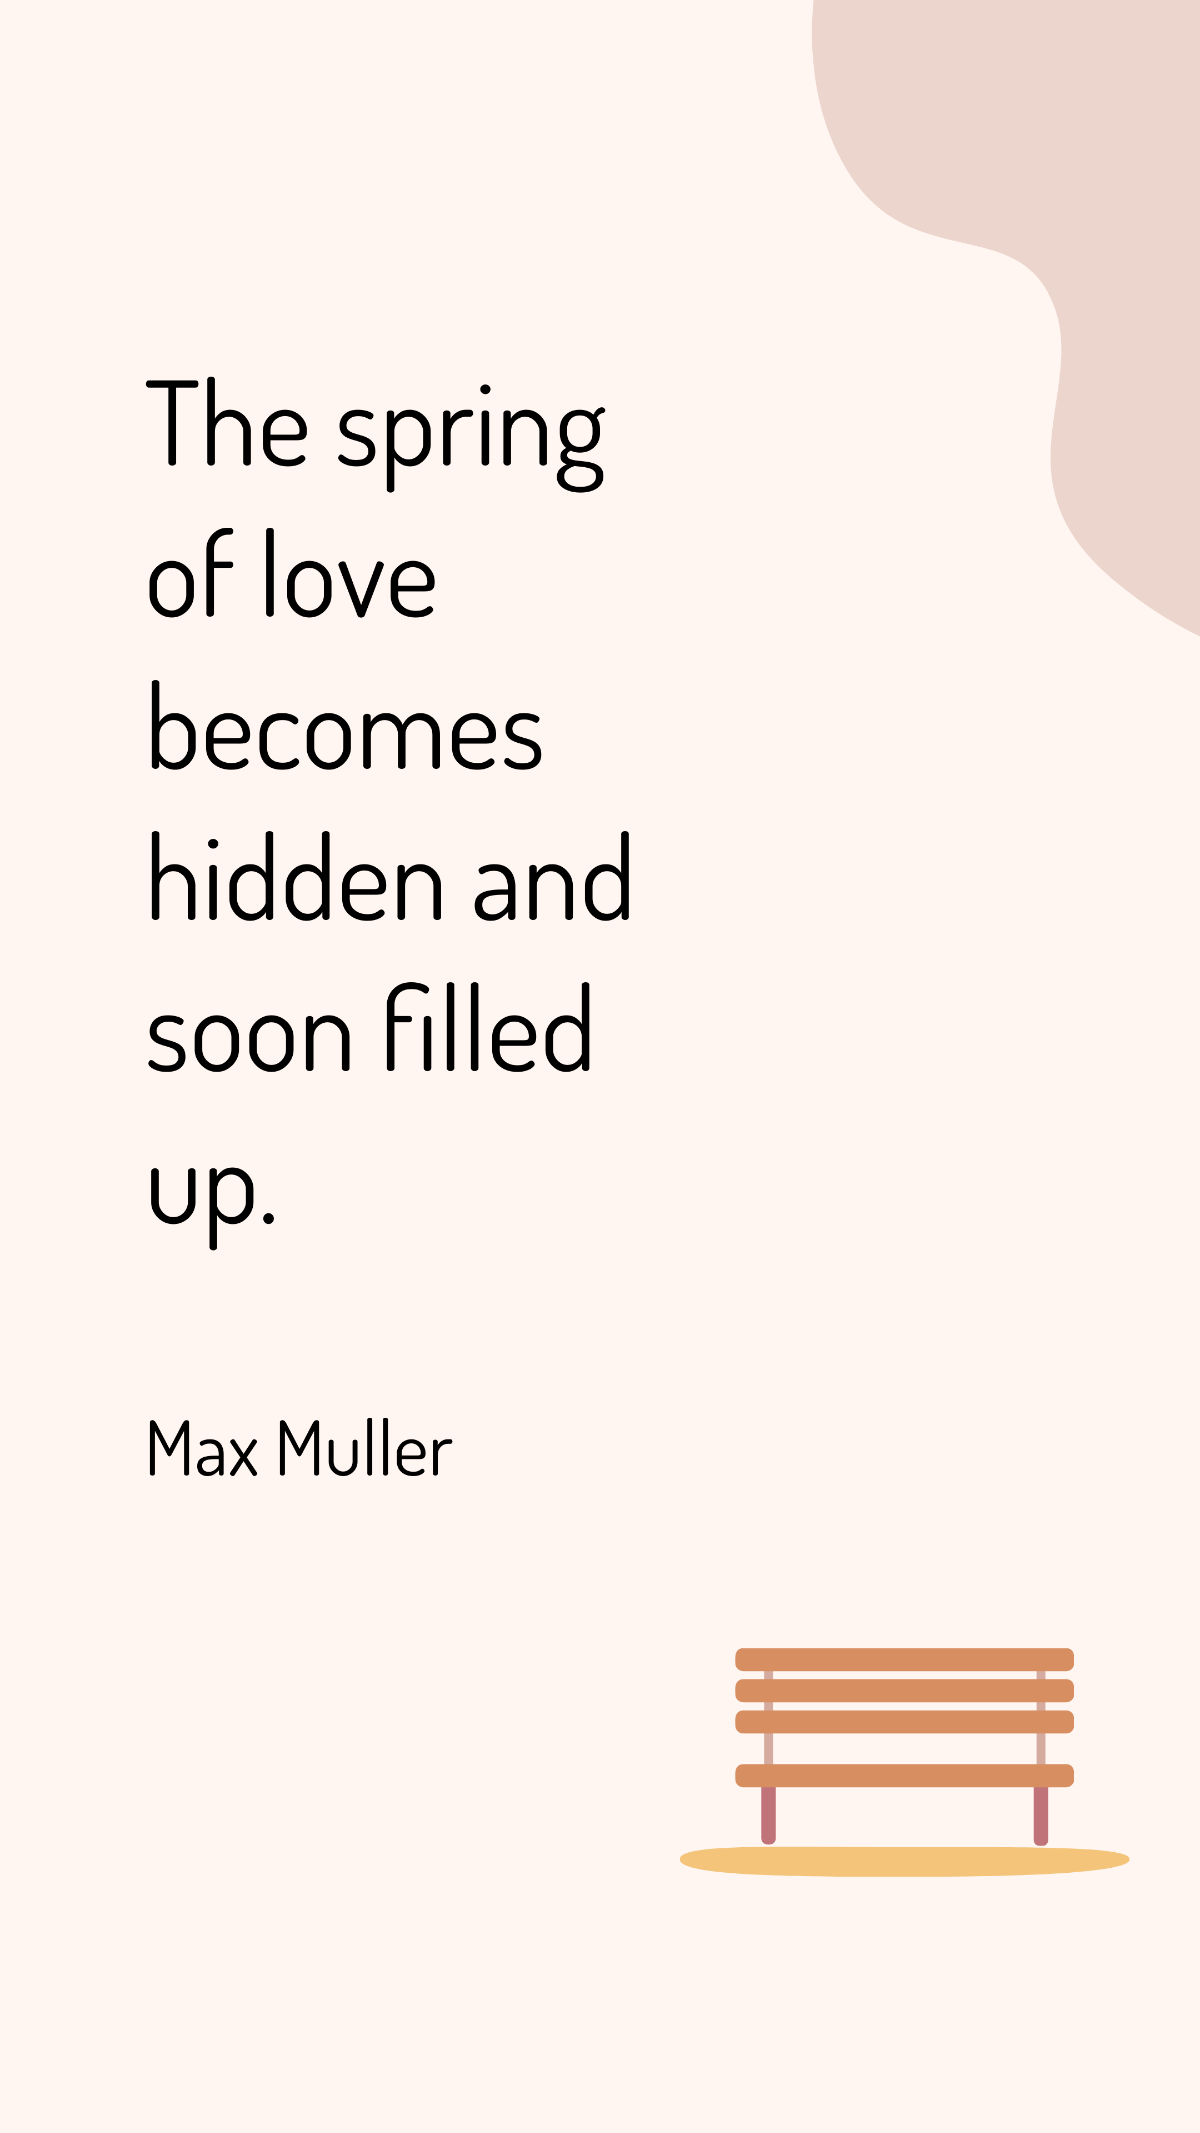 Max Muller - The spring of love becomes hidden and soon filled up. Template